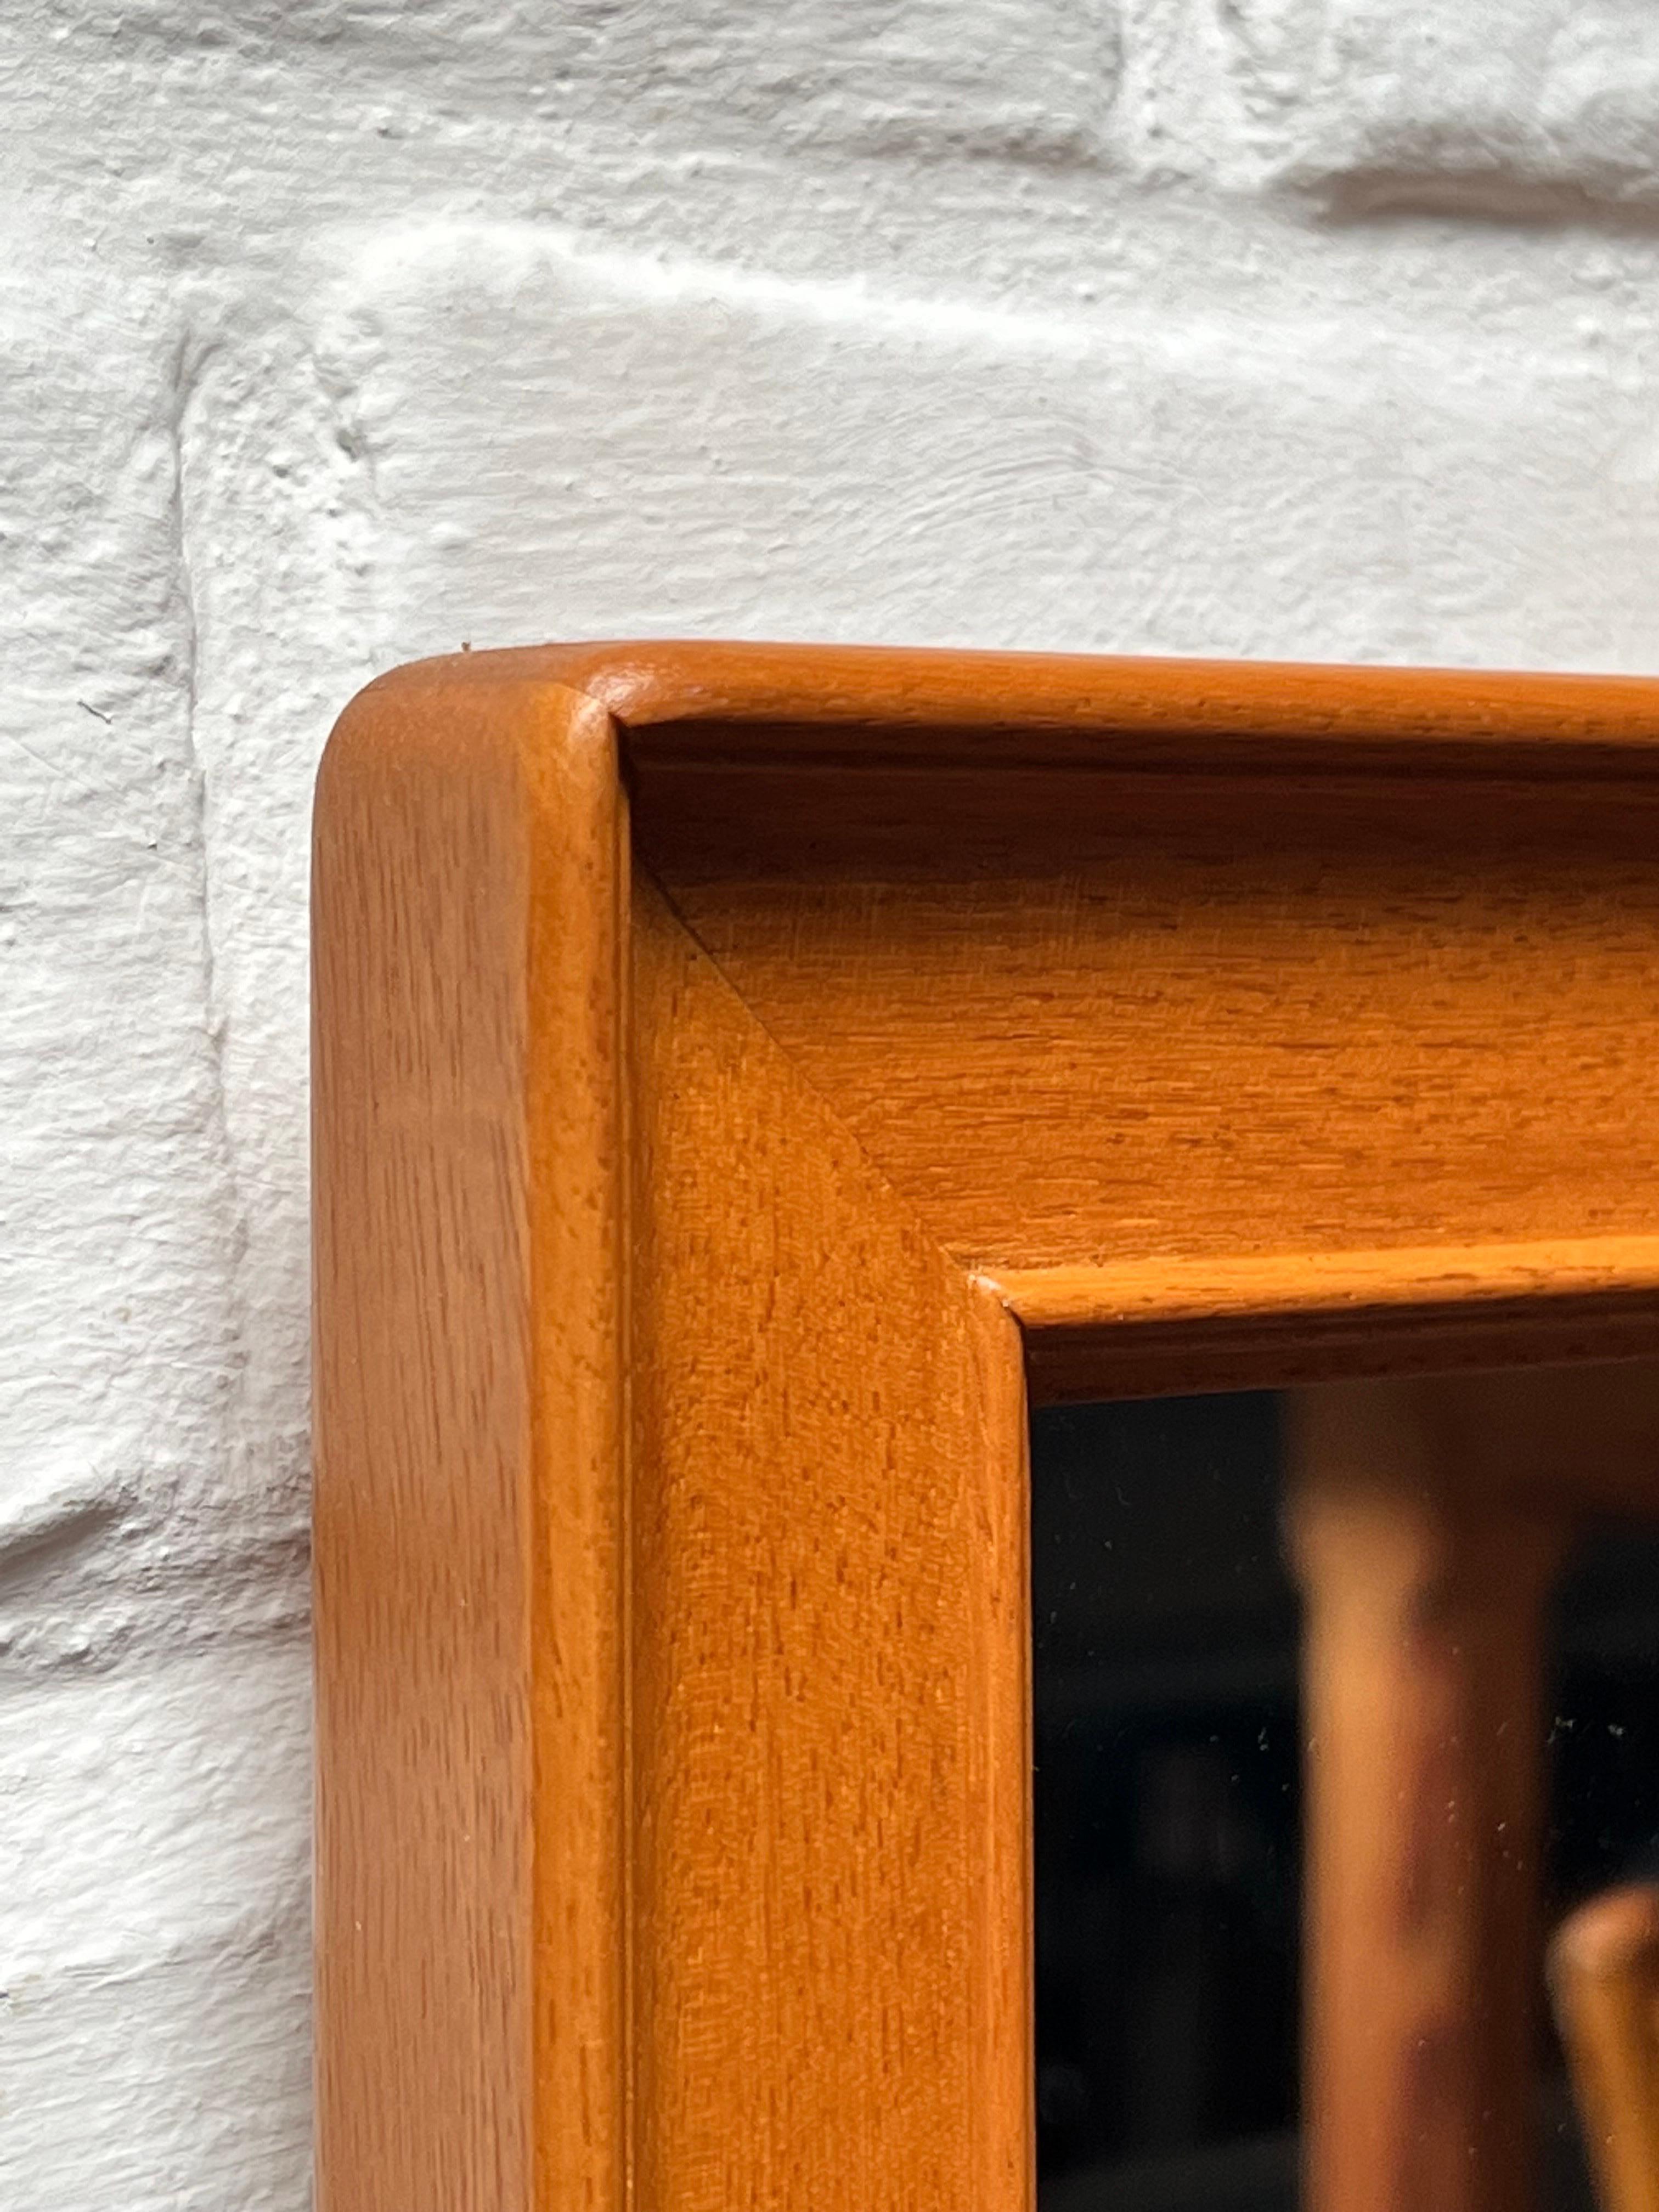 This is an unusual Mahogany mirror produced in Sweden in 1994 by one of the craftsman students of the Malmsten school. Elegant and classic shape. It will brighten any projects. We just cleaned it and there's minor traces of use. Branded with Carl